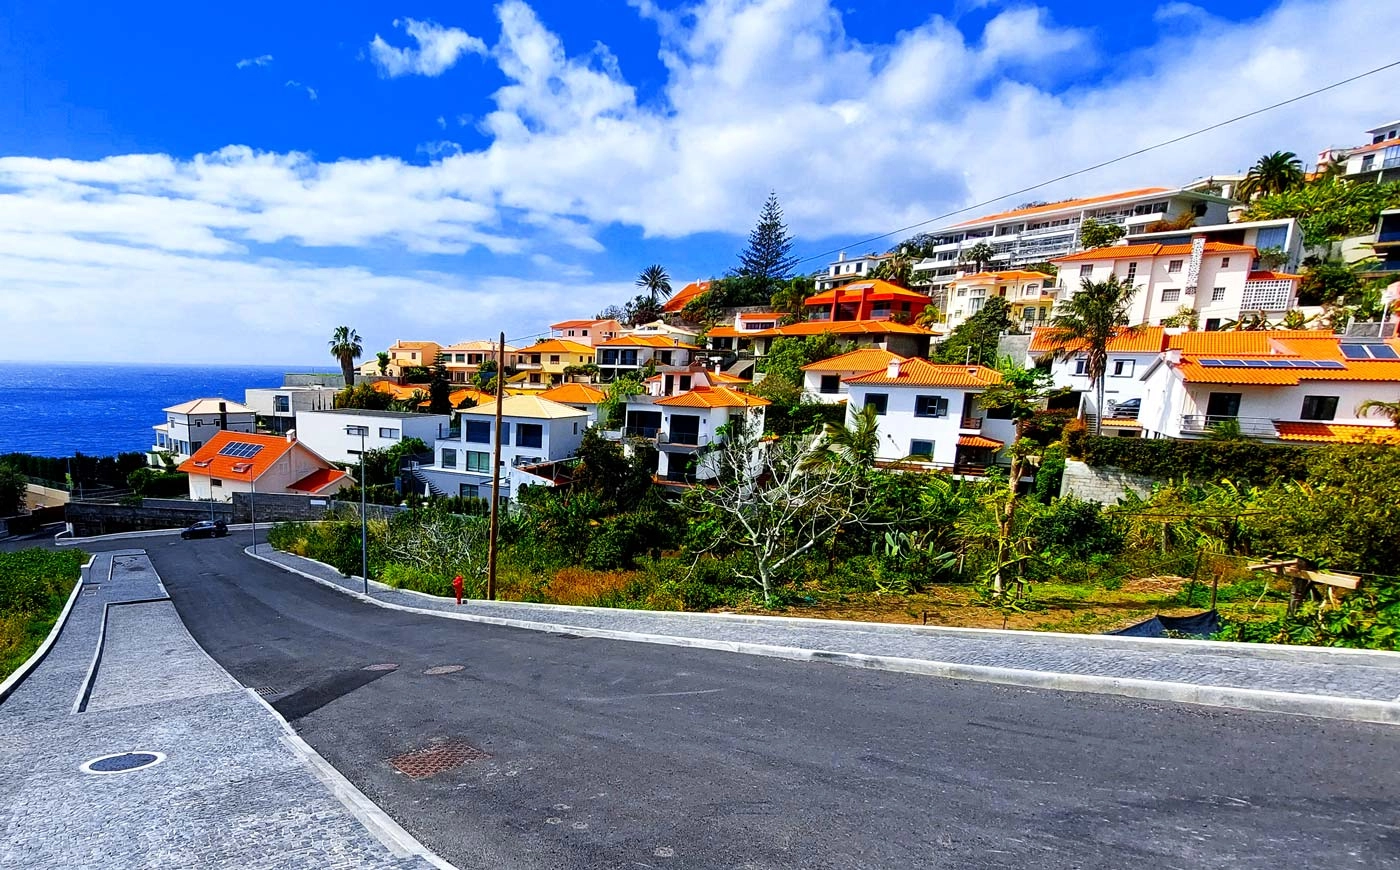 Average House Price In Madeira Now €460,000